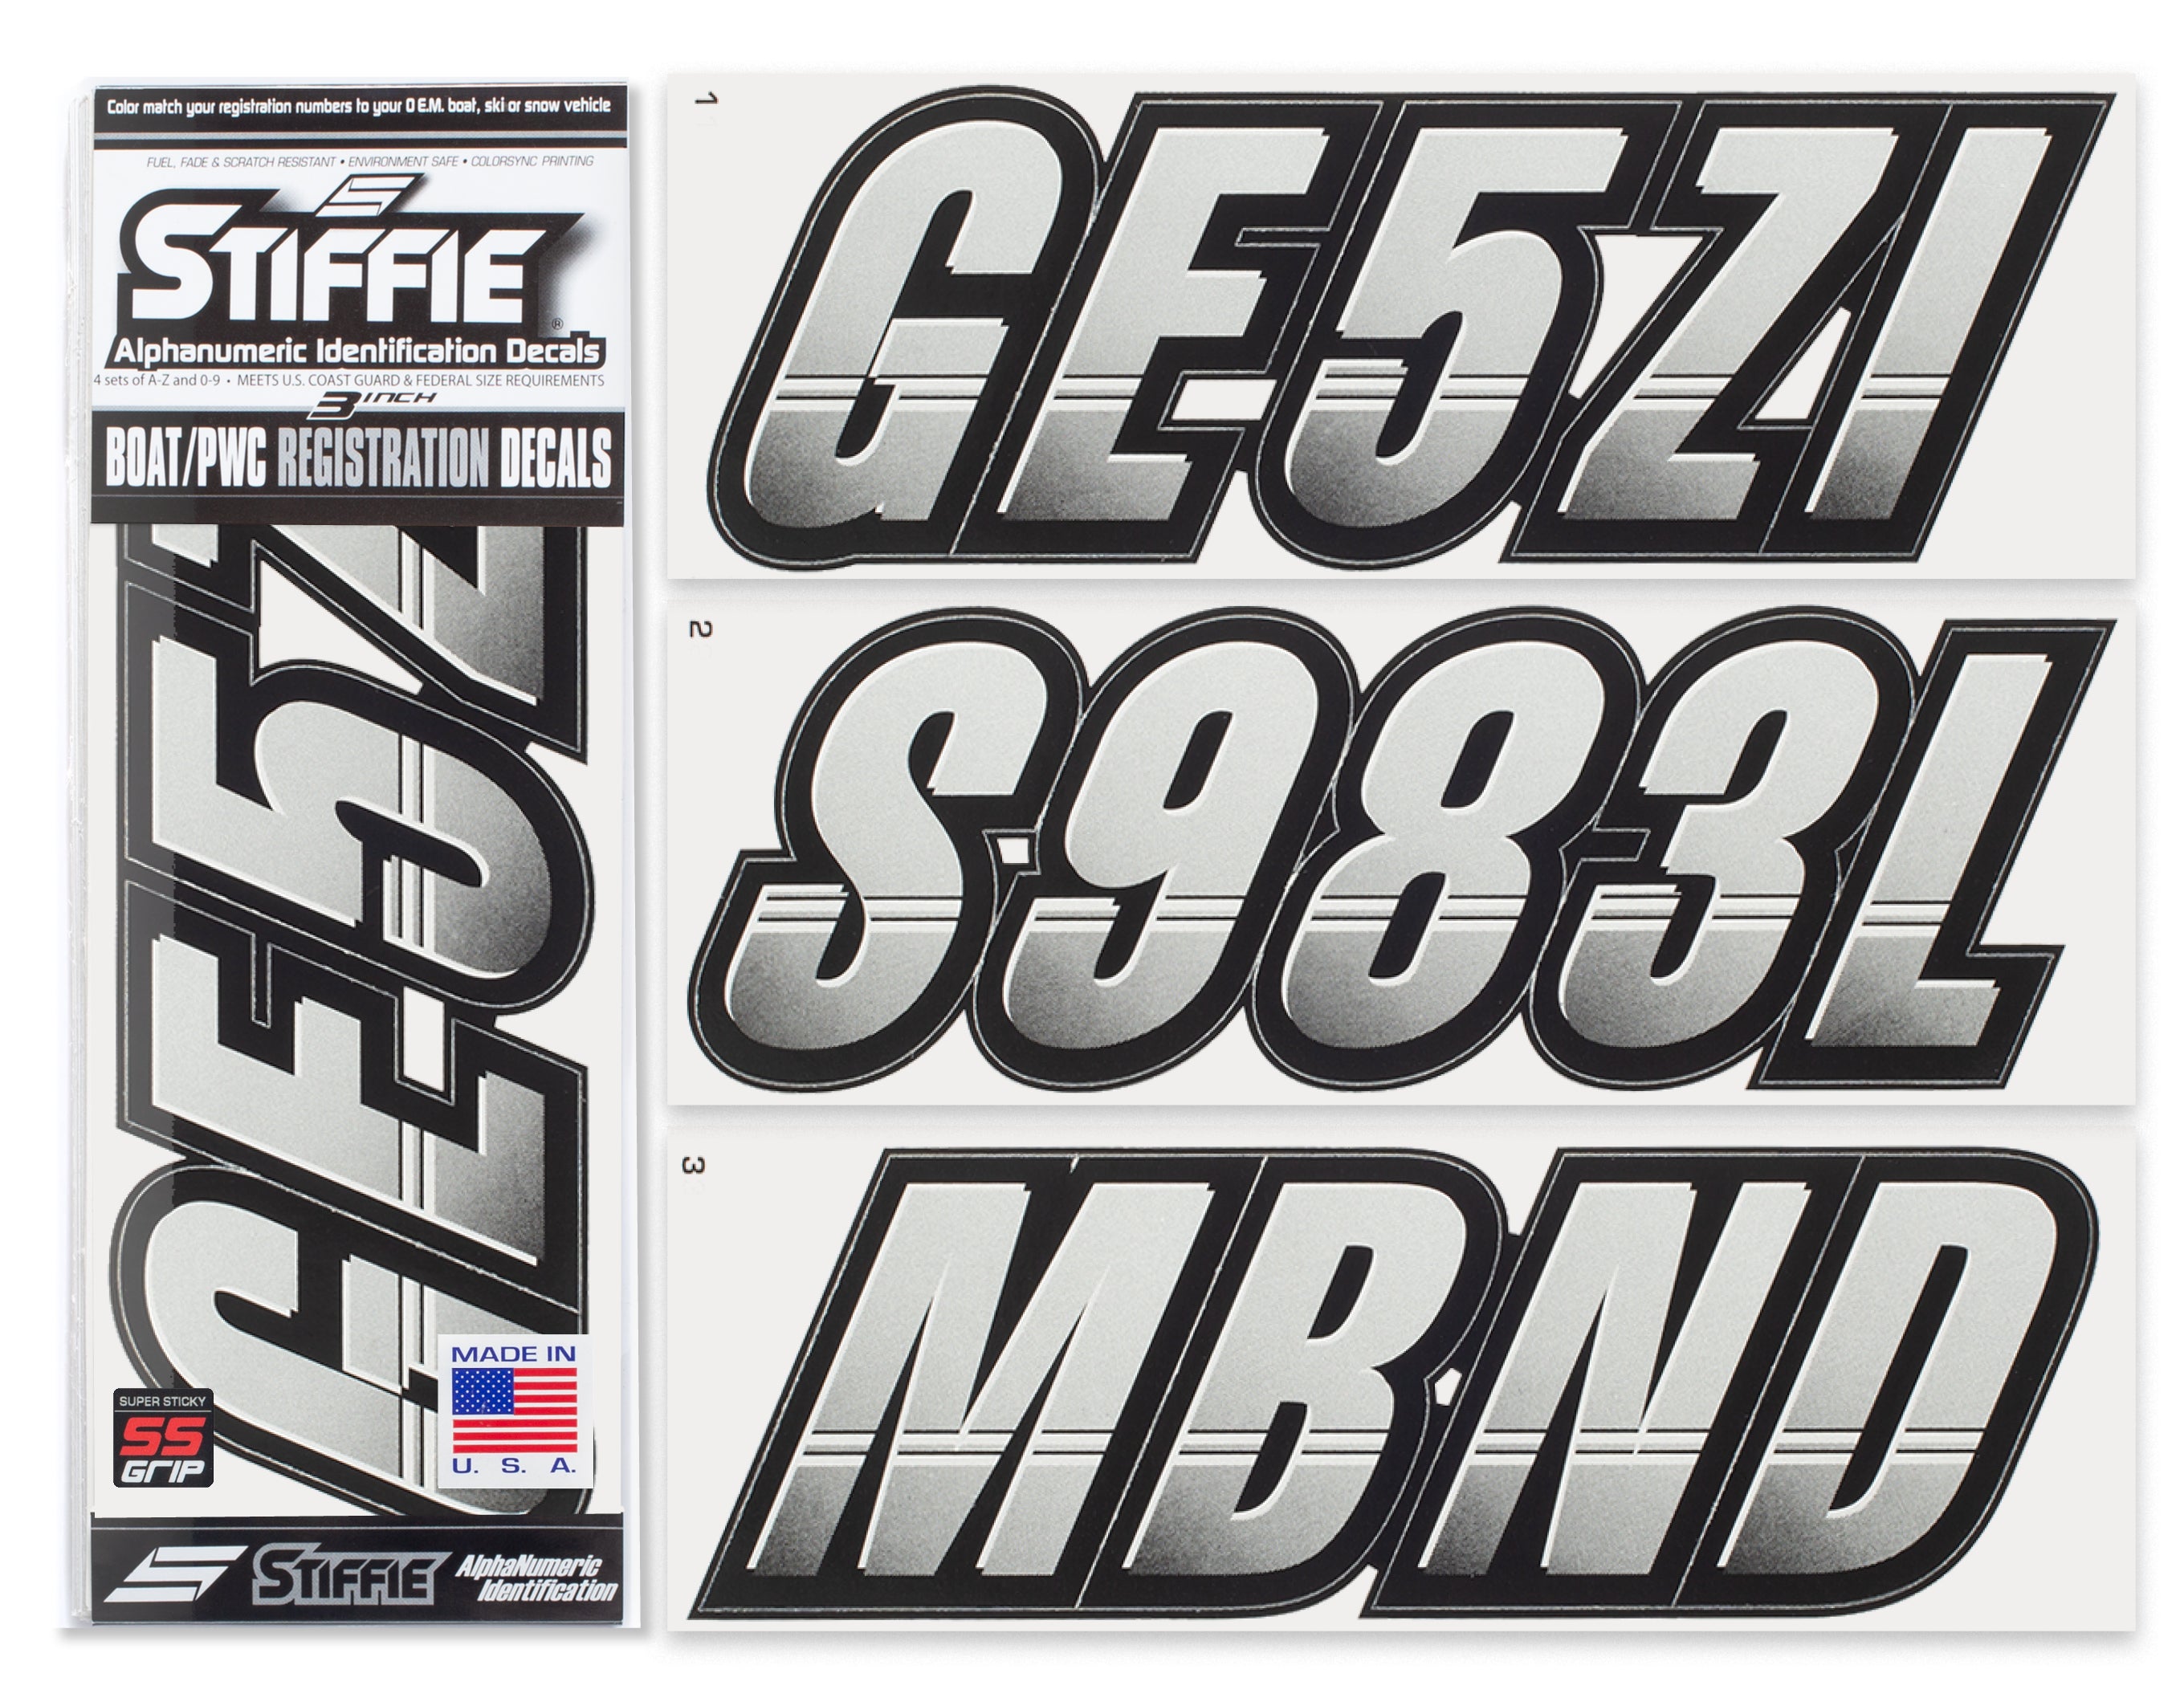 Techtron Silver/Black Super Sticky 3" Alpha Numeric Registration Identification Numbers Stickers Decals for Sea-Doo Spark, Inflatable Boats, Ribs, Hypalon/PVC, PWC and Boats.